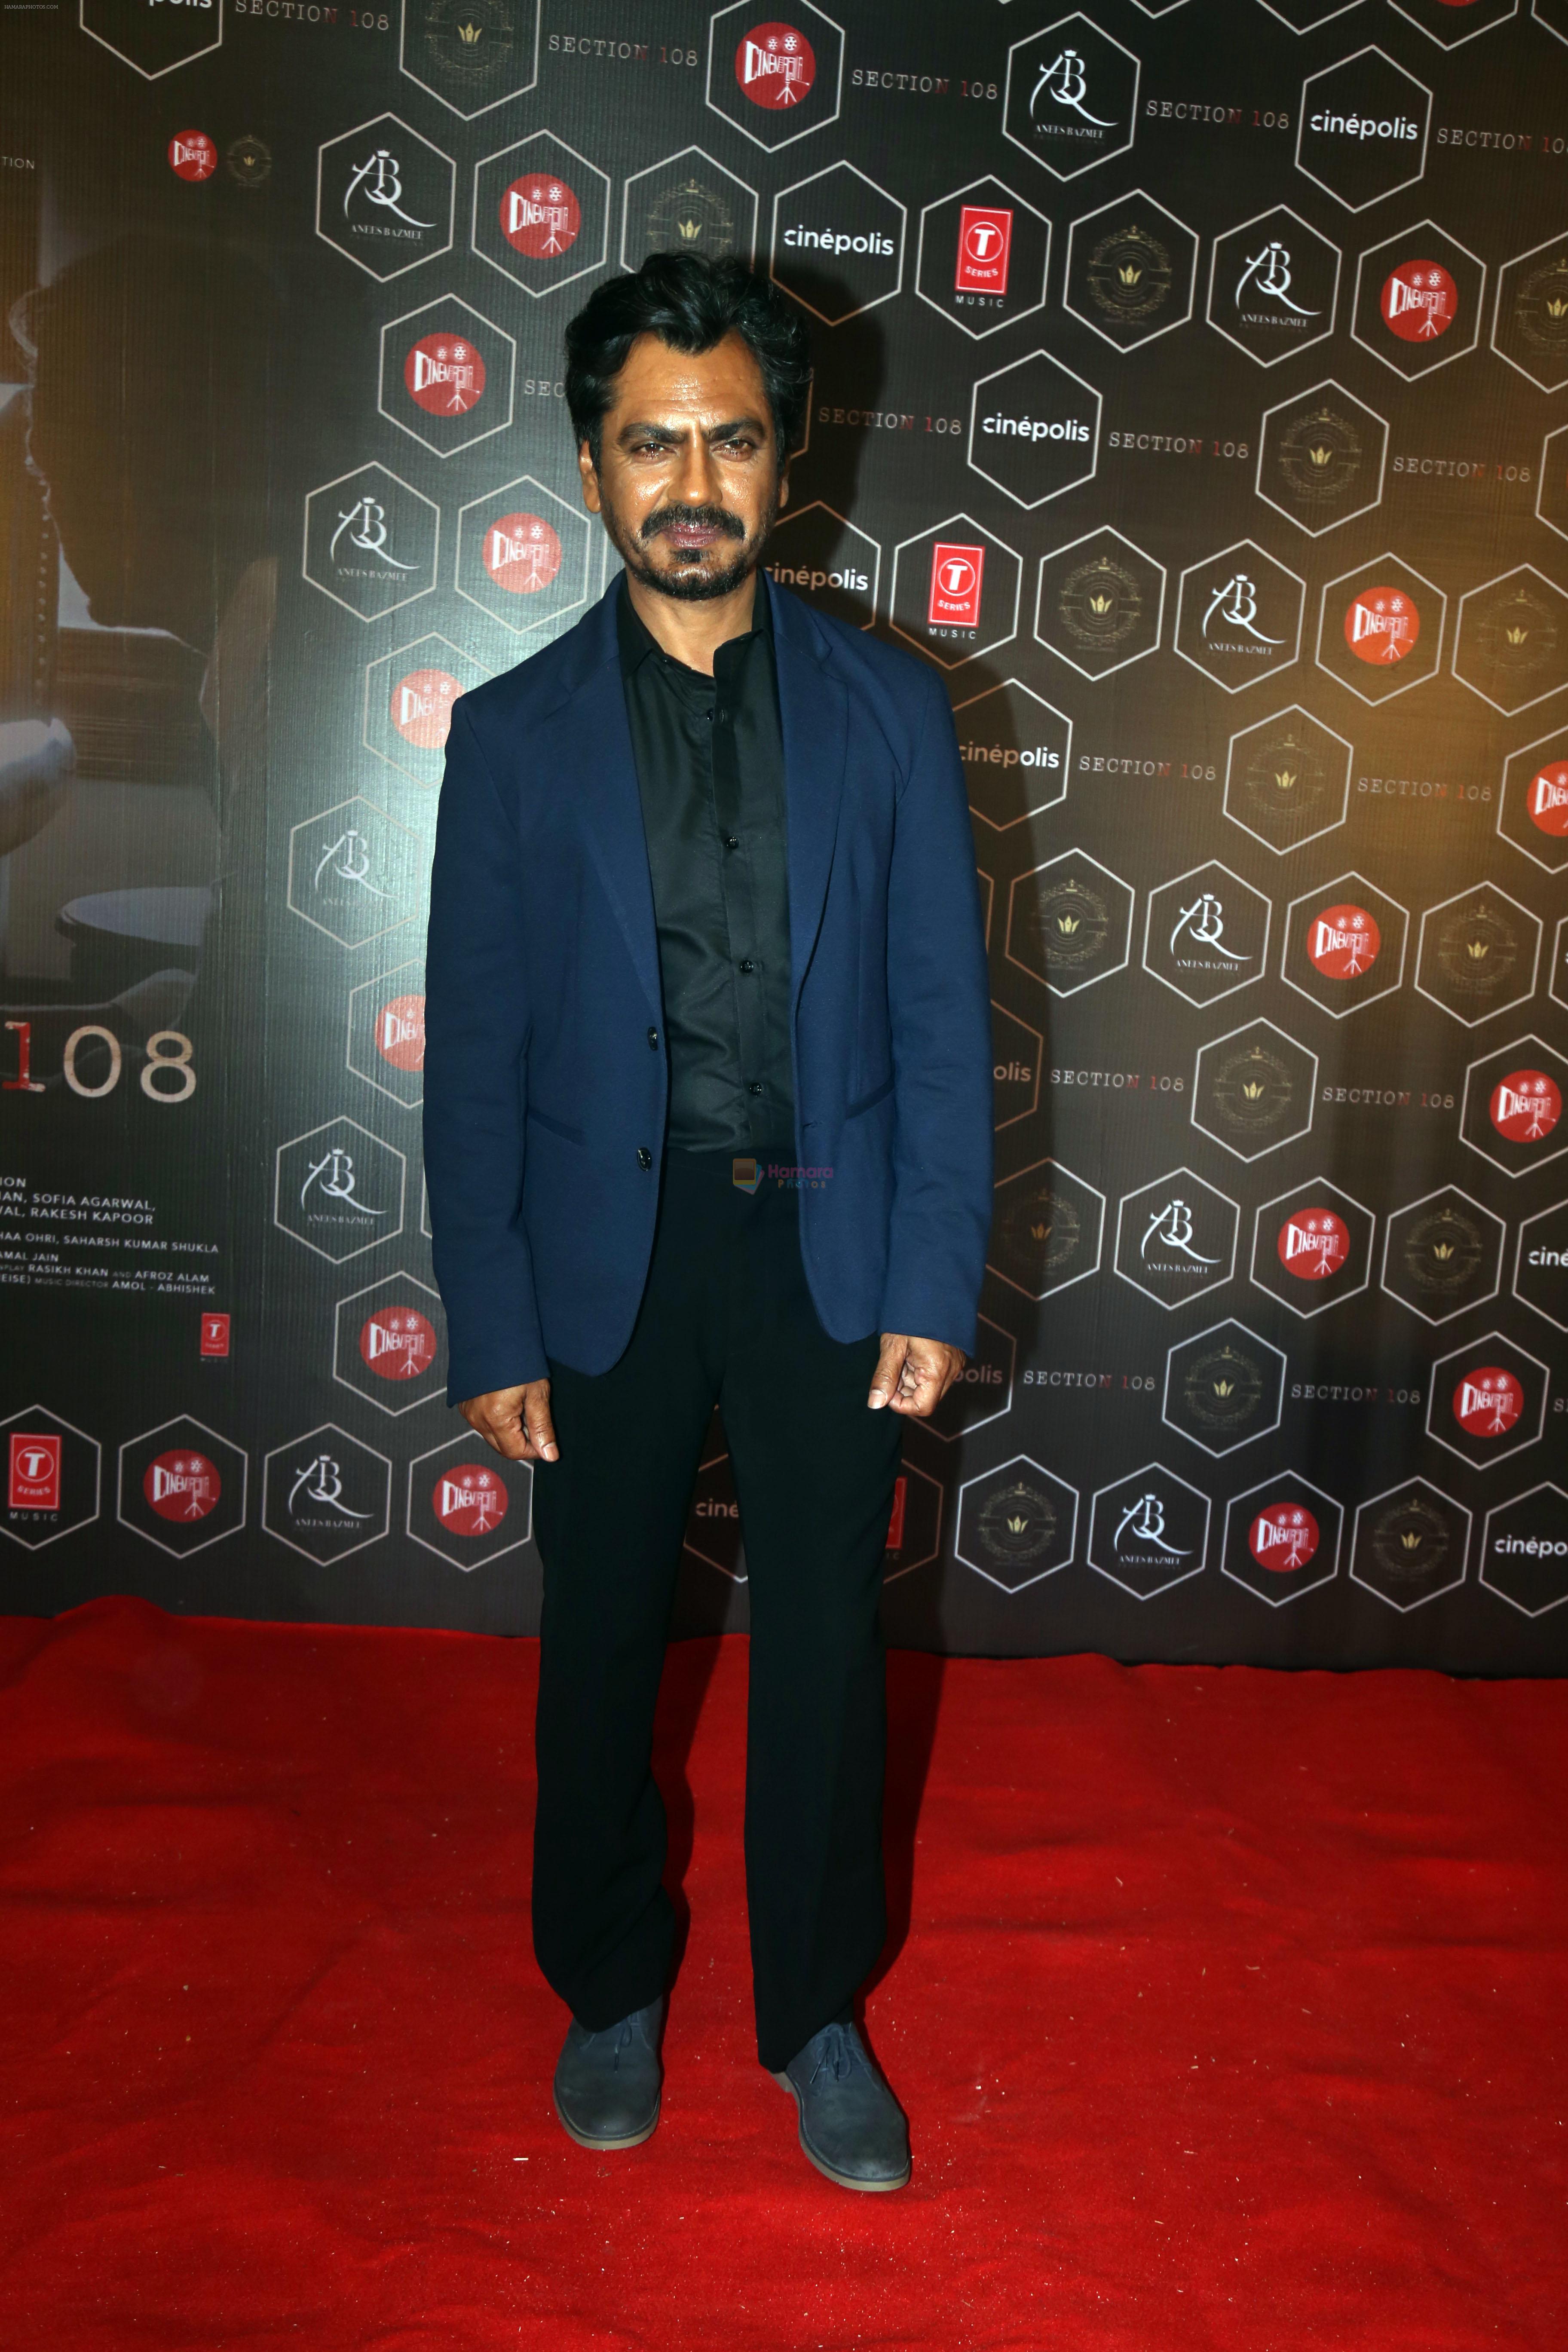 Nawazuddin Siddiqui at the launch of film Section 108 Teaser on 27th August 2023